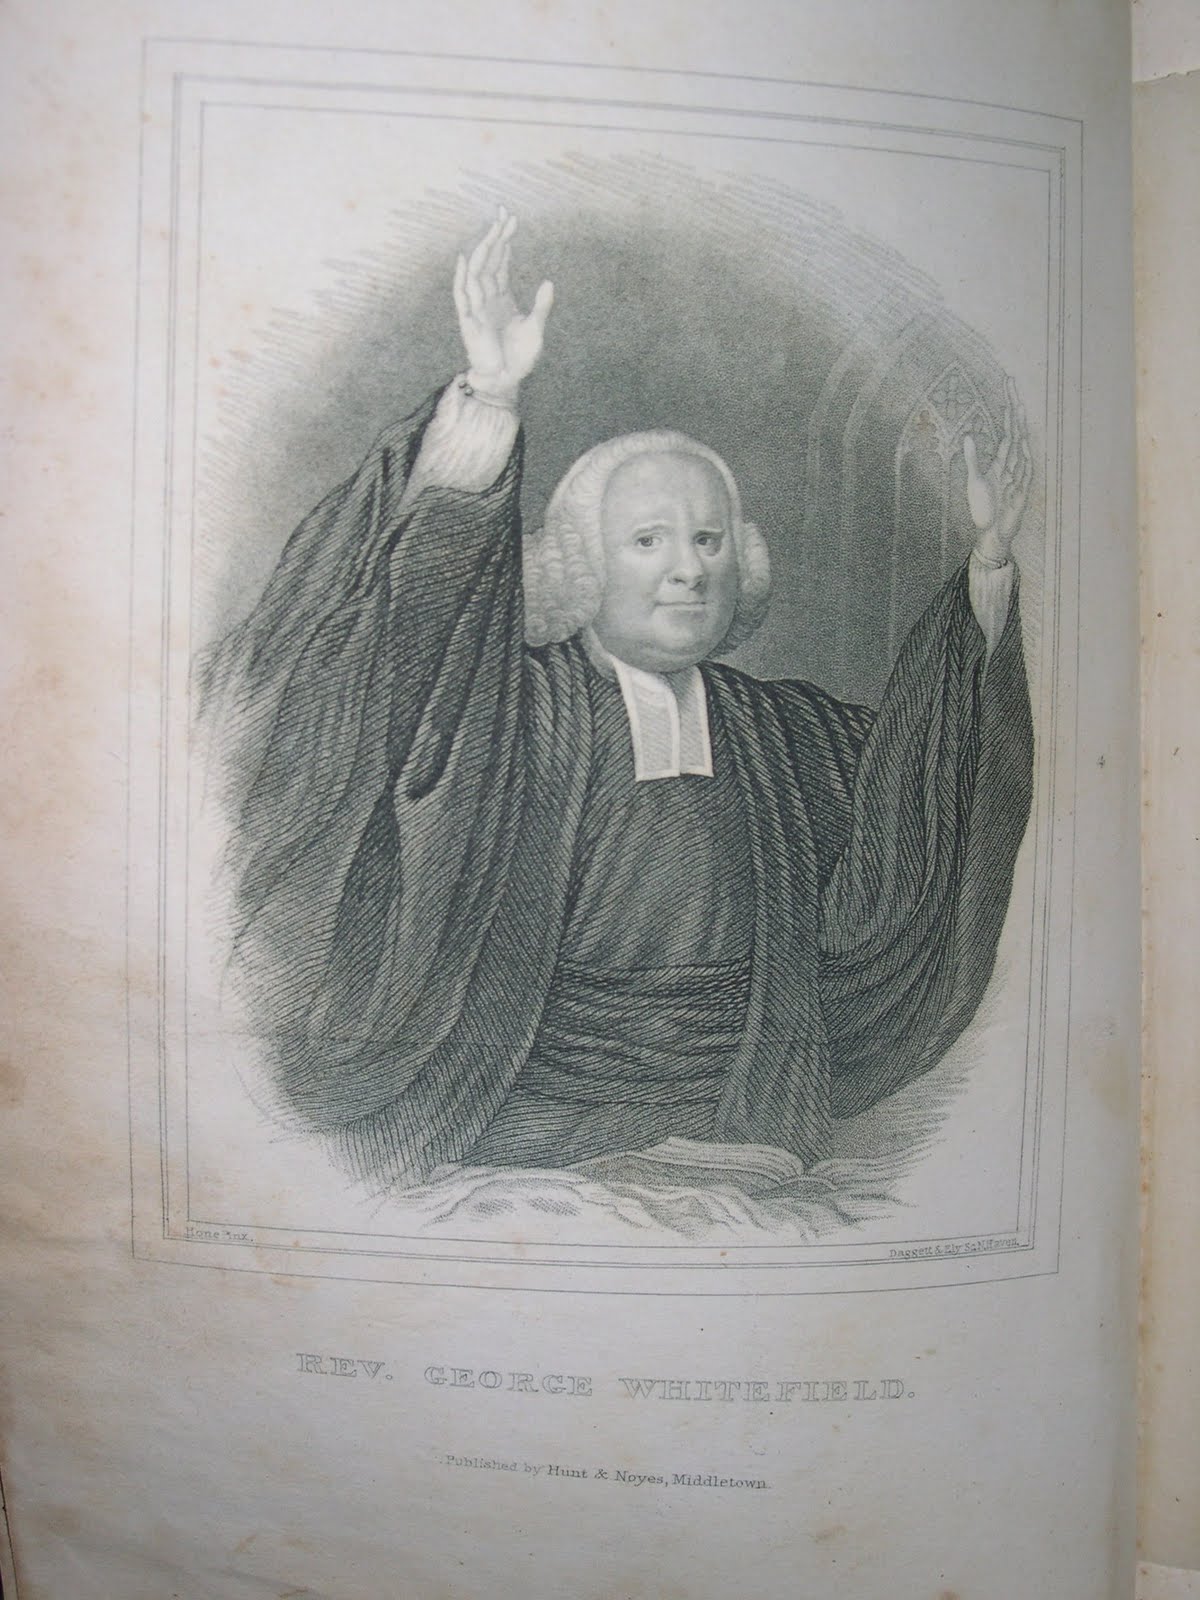 Illustration of Reverend George Whitefield with hands raised